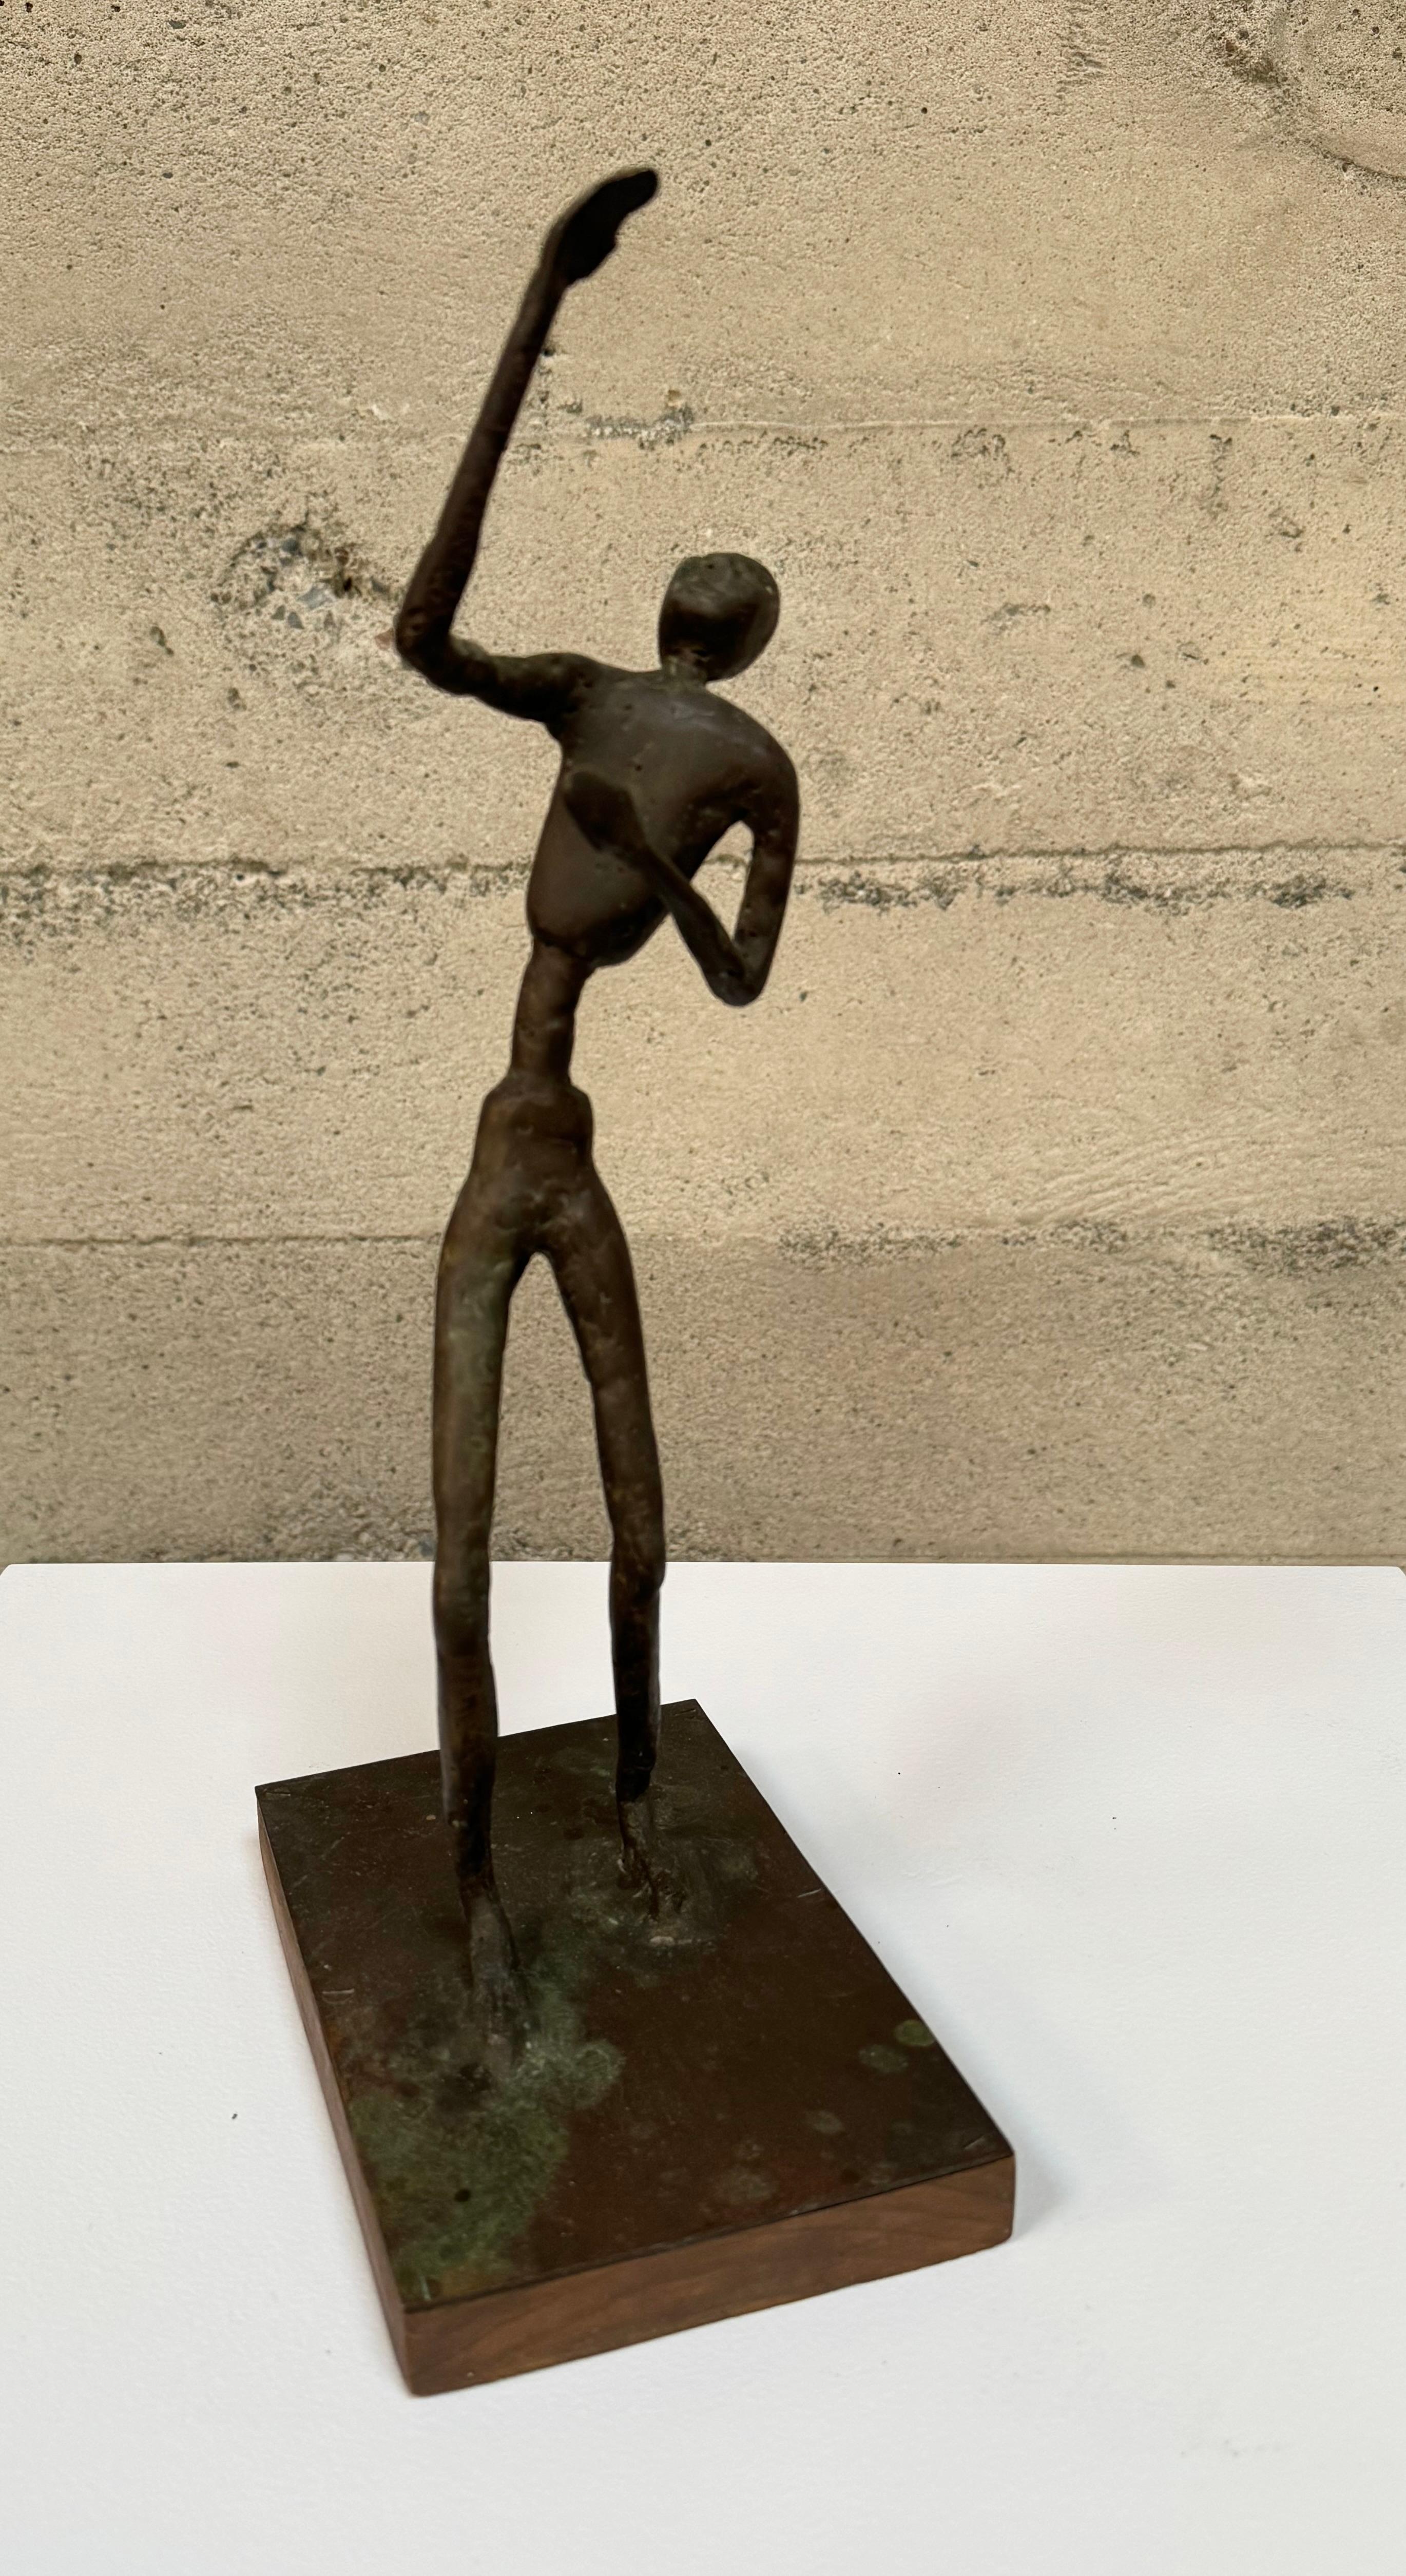 An expressive figurative abstract by Bay Area artist John Larkin, he was a local artist who was active in the 1960s but little is known about the artist. A thin figure done in a textured bronze mounted on a wooden base. The sculpture has developed a